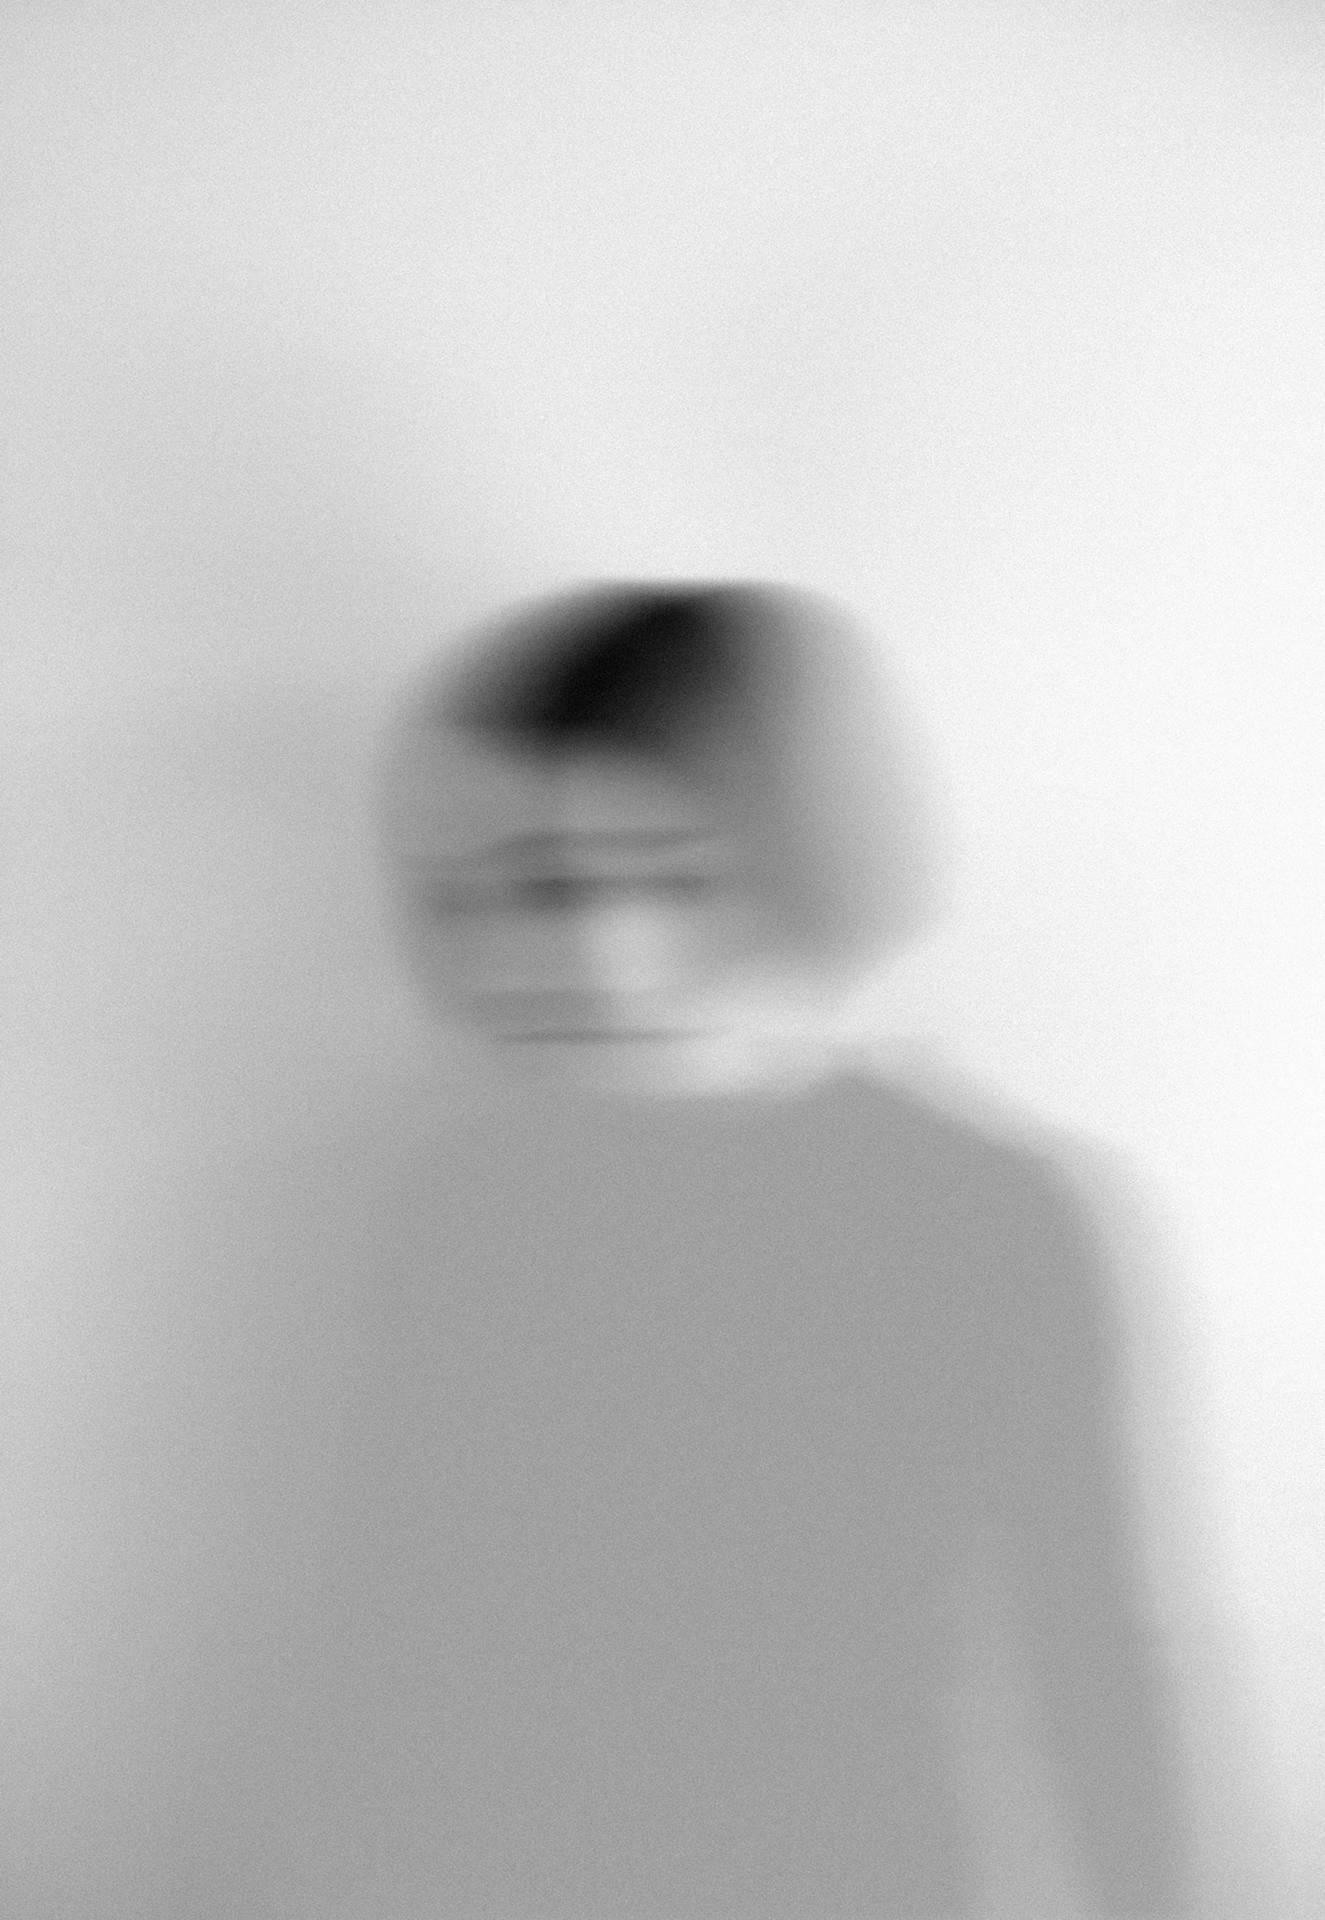 Distorted Image Of An Anxious Woman